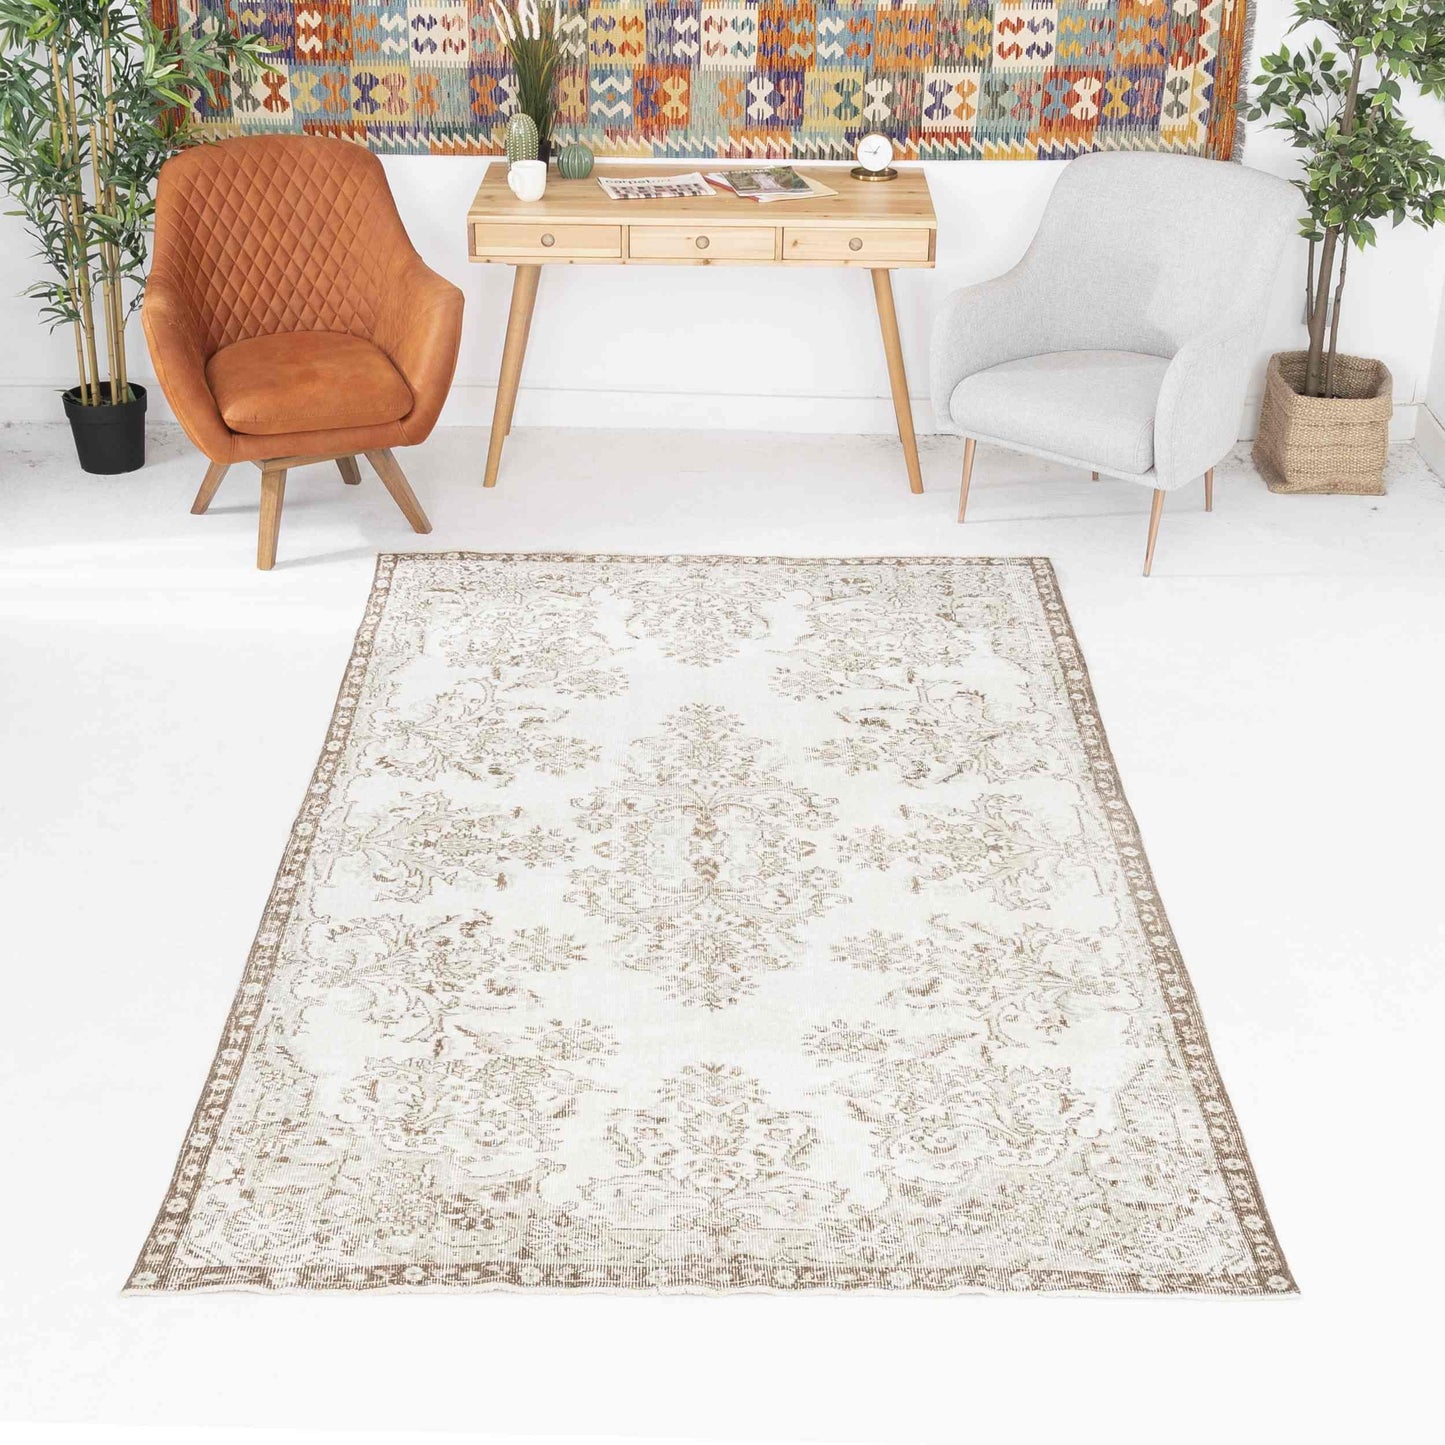 Oriental Rug Vintage Hand Knotted Wool On Cotton 170 x 280 Cm - 5' 7'' x 9' 3'' Sand C007 ER12